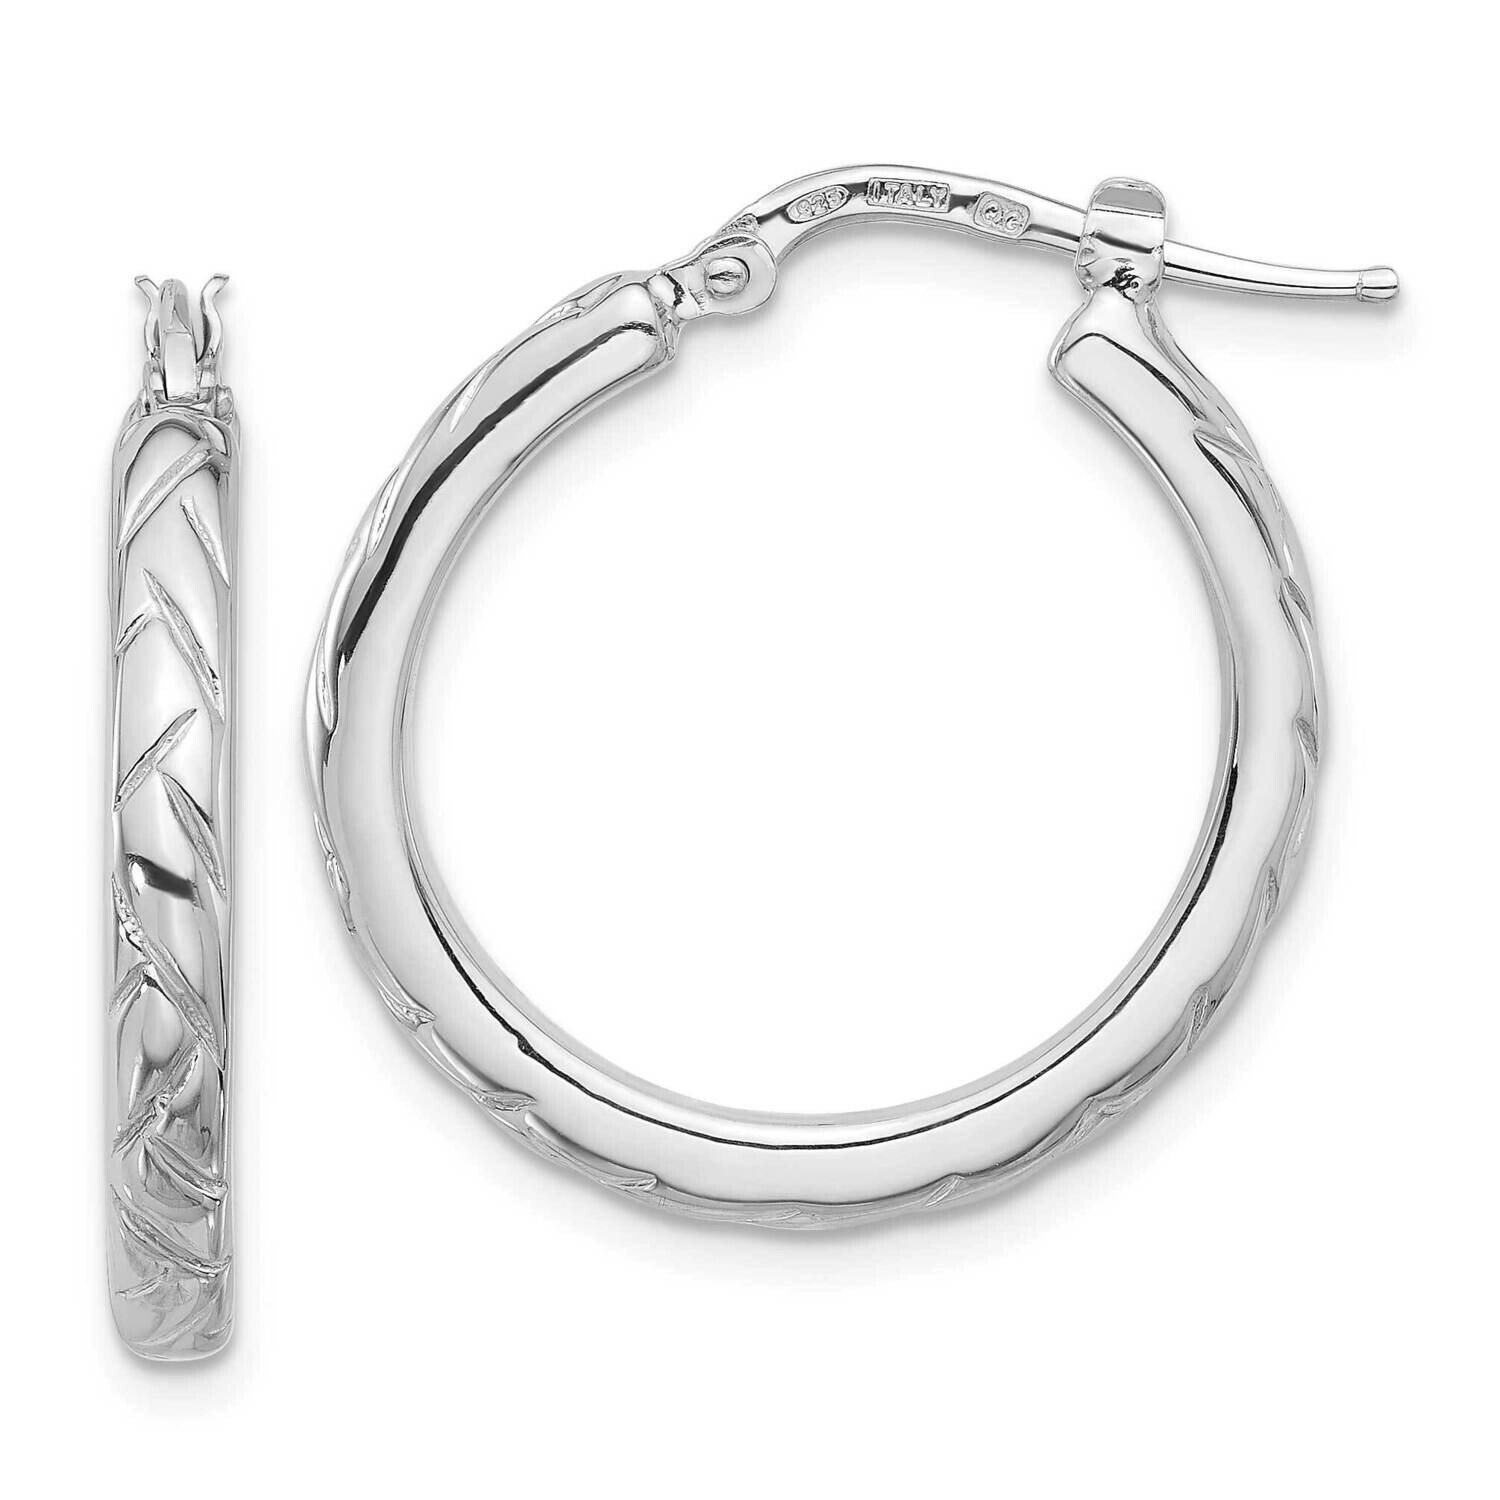 Polished Textured Hoop Earrings Sterling Silver Rhodium-Plated QE16808